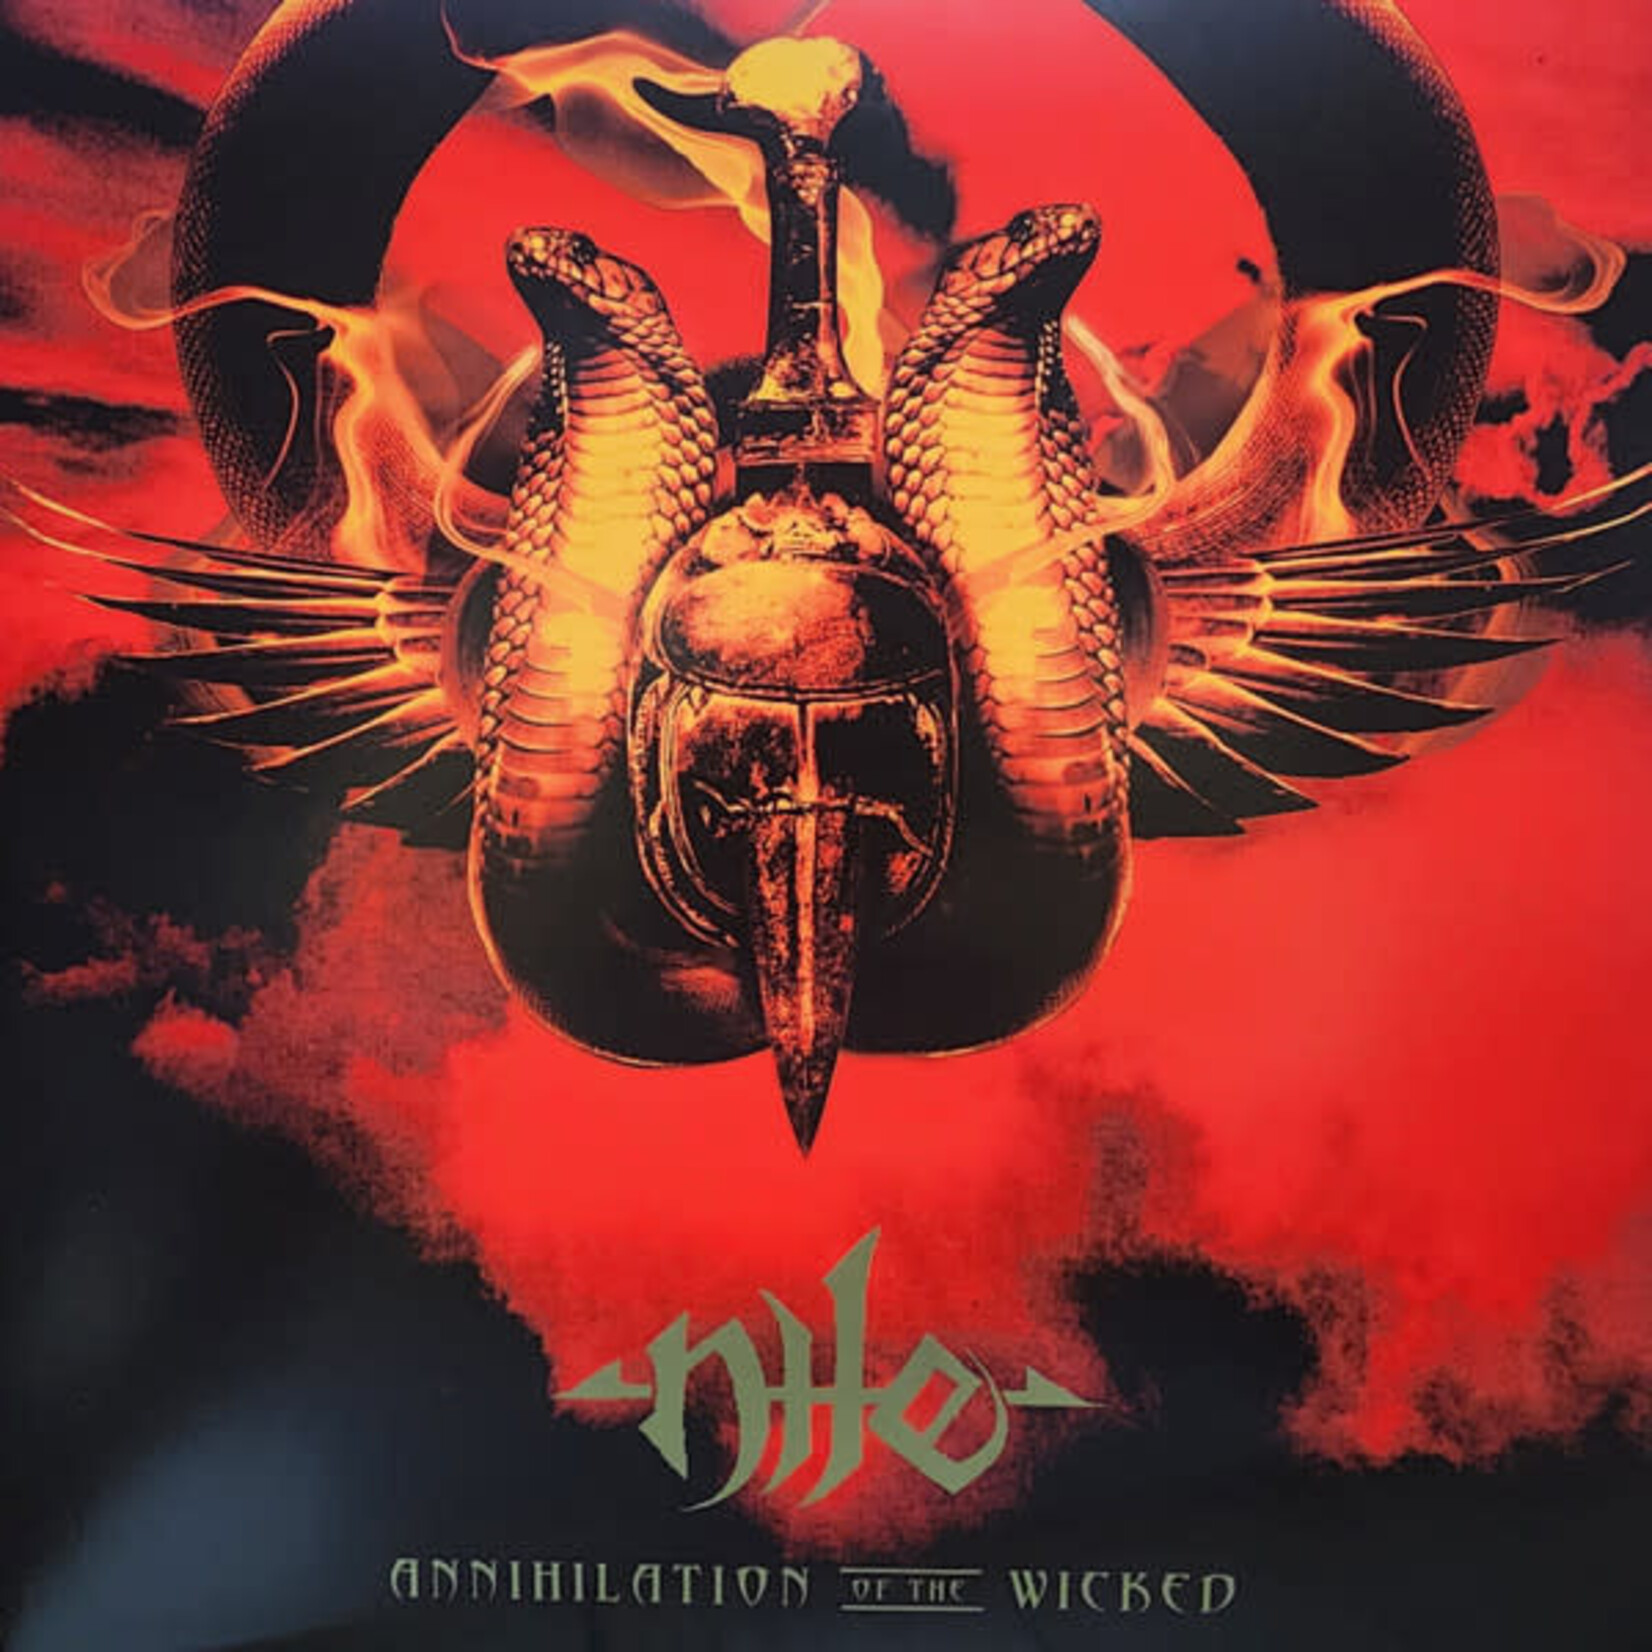 Relapse Nile - Annihilation of the Wicked (2LP) [Red Splatter]